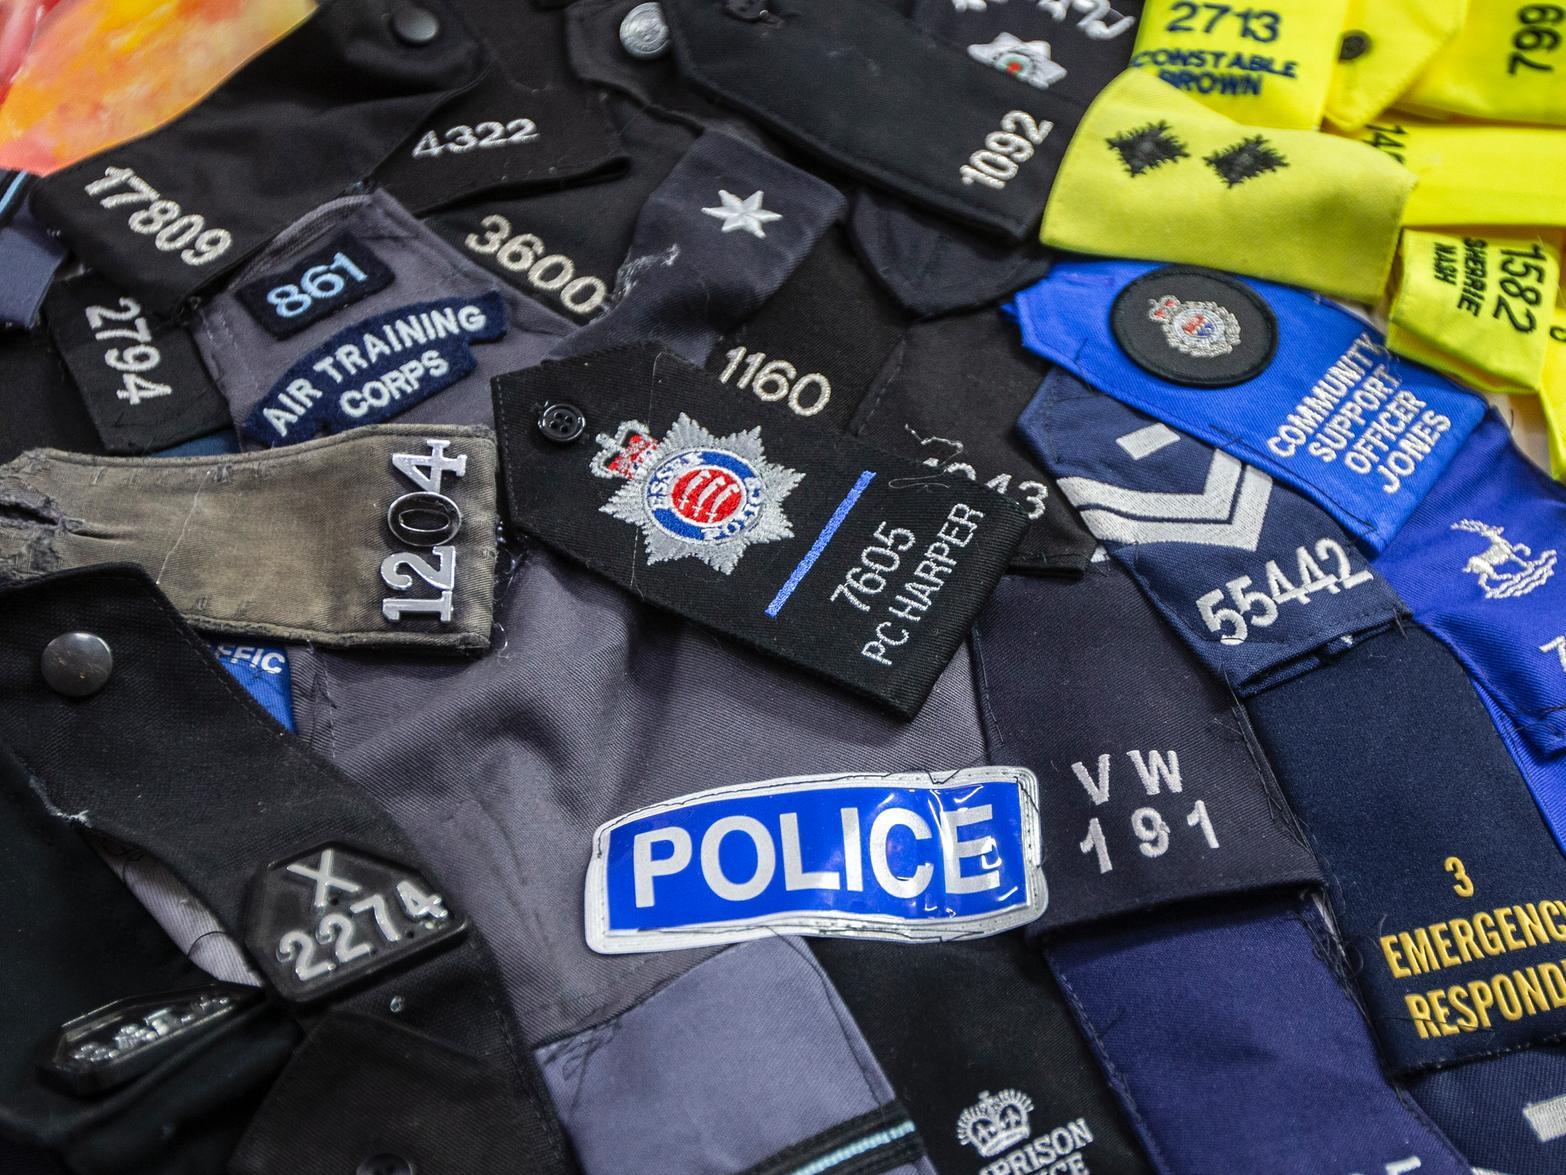 Essex Police made an epaulette to commemorate Thames Valley Police officer PC Harper. Photo: Kirsty Edmonds.